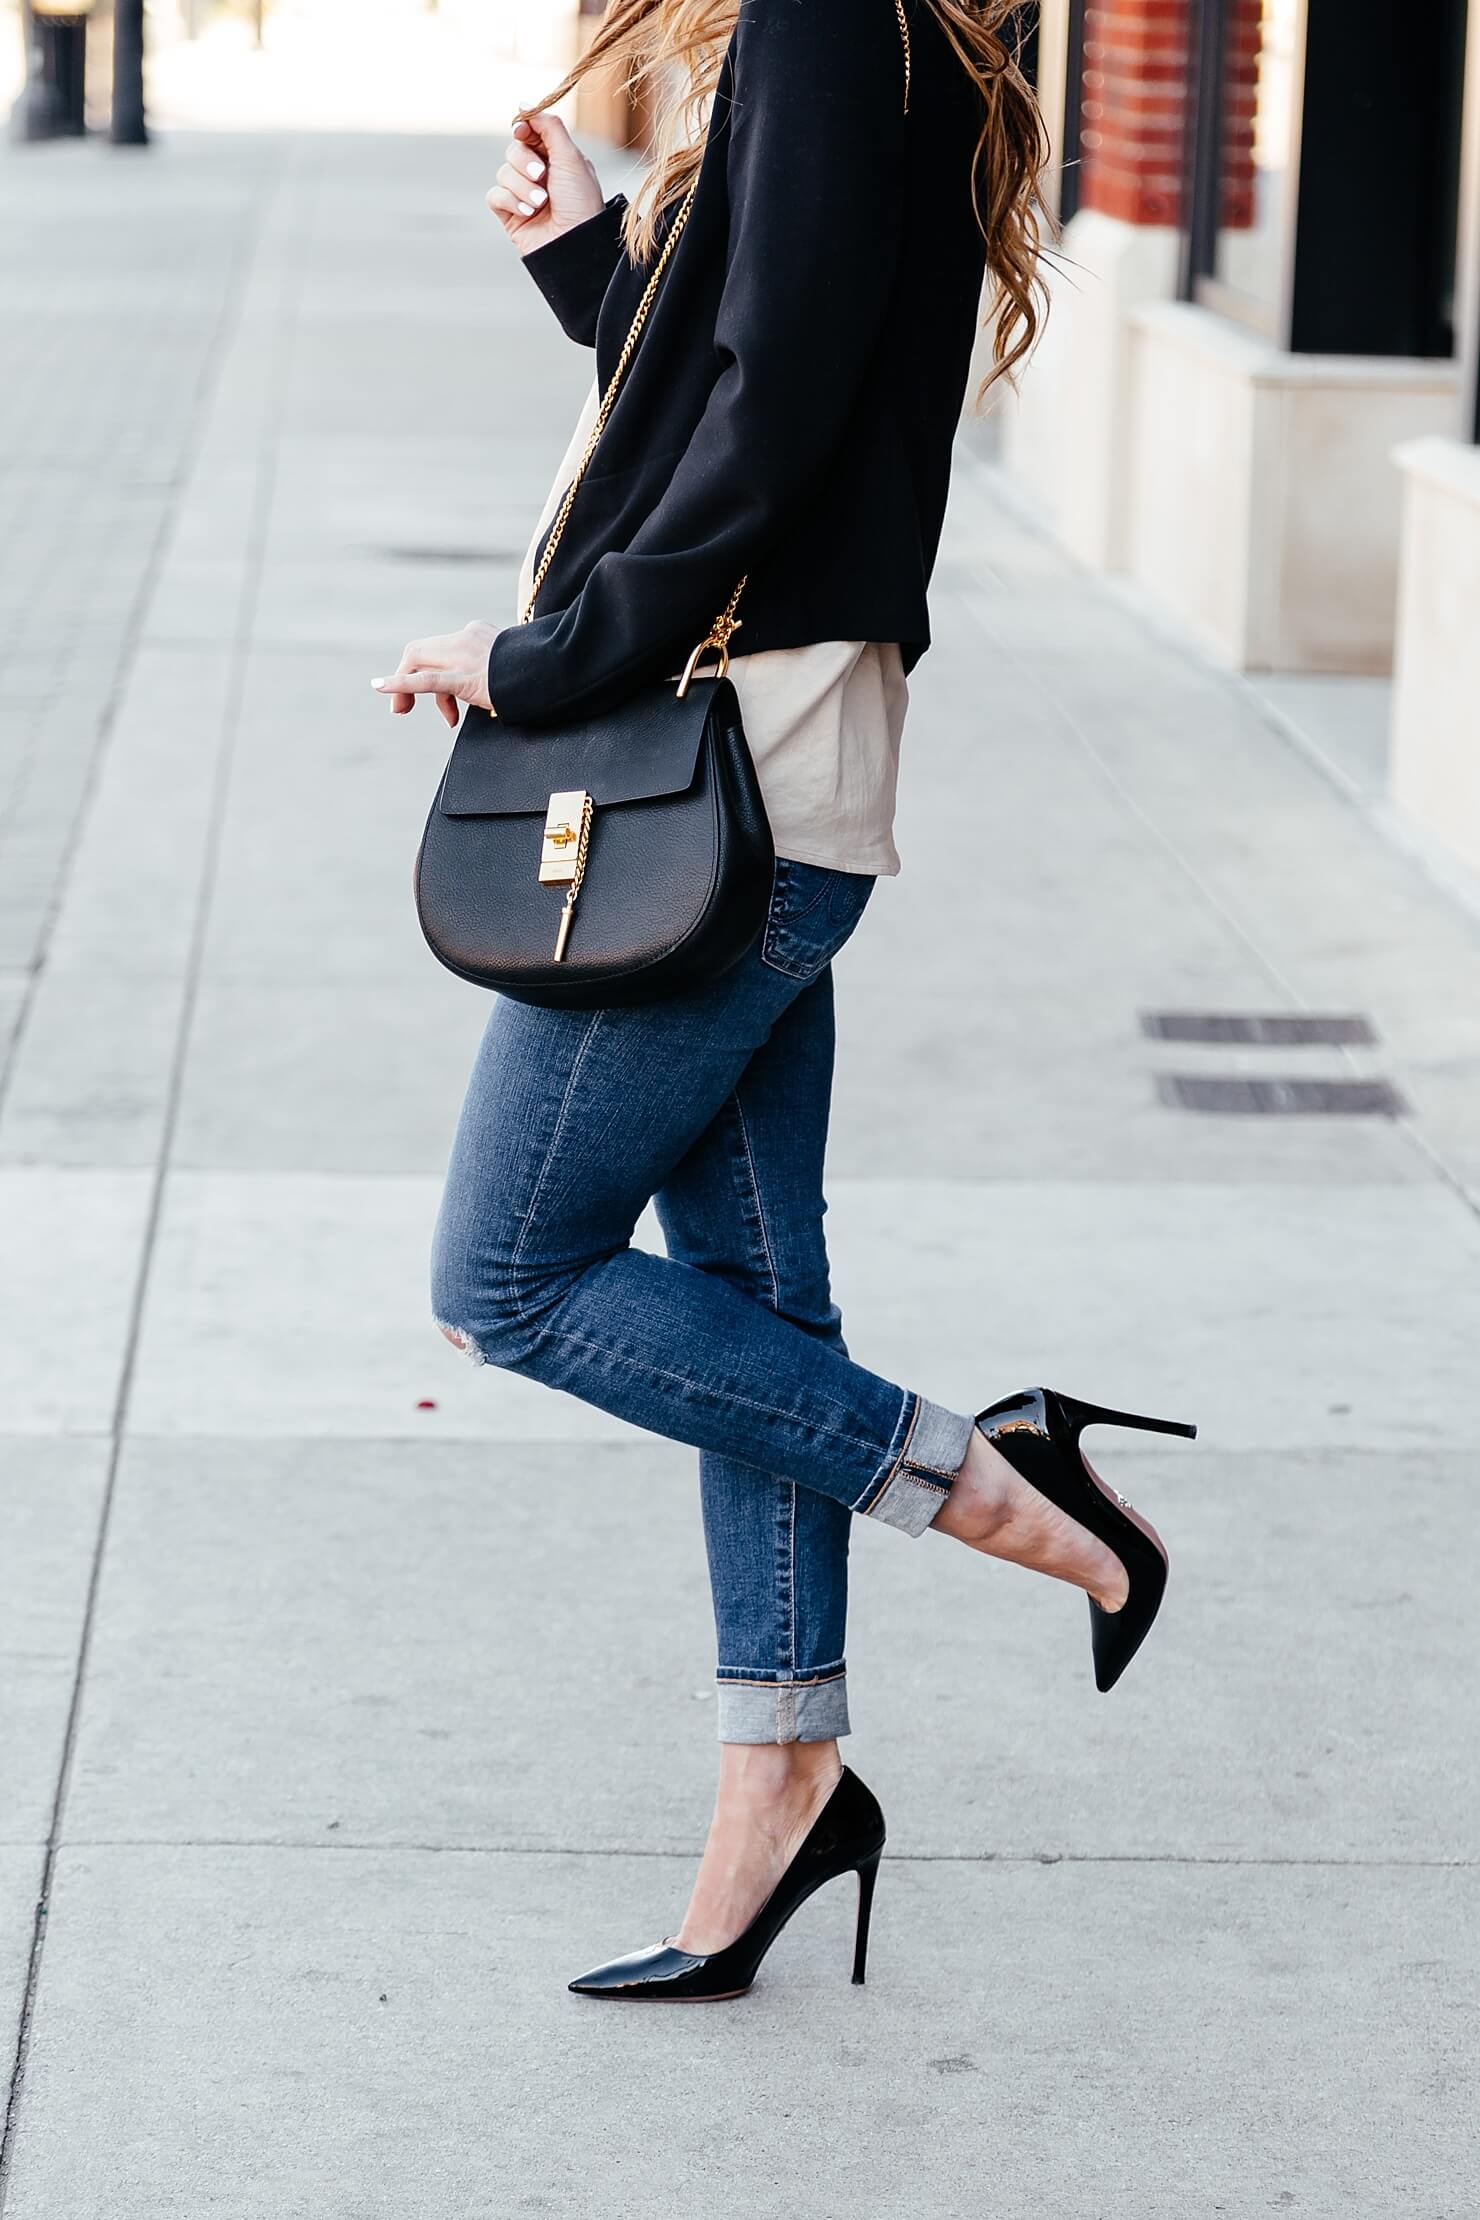 brighton keller styling prada patent pumps with jeans and black blazer and chloe small drew bag